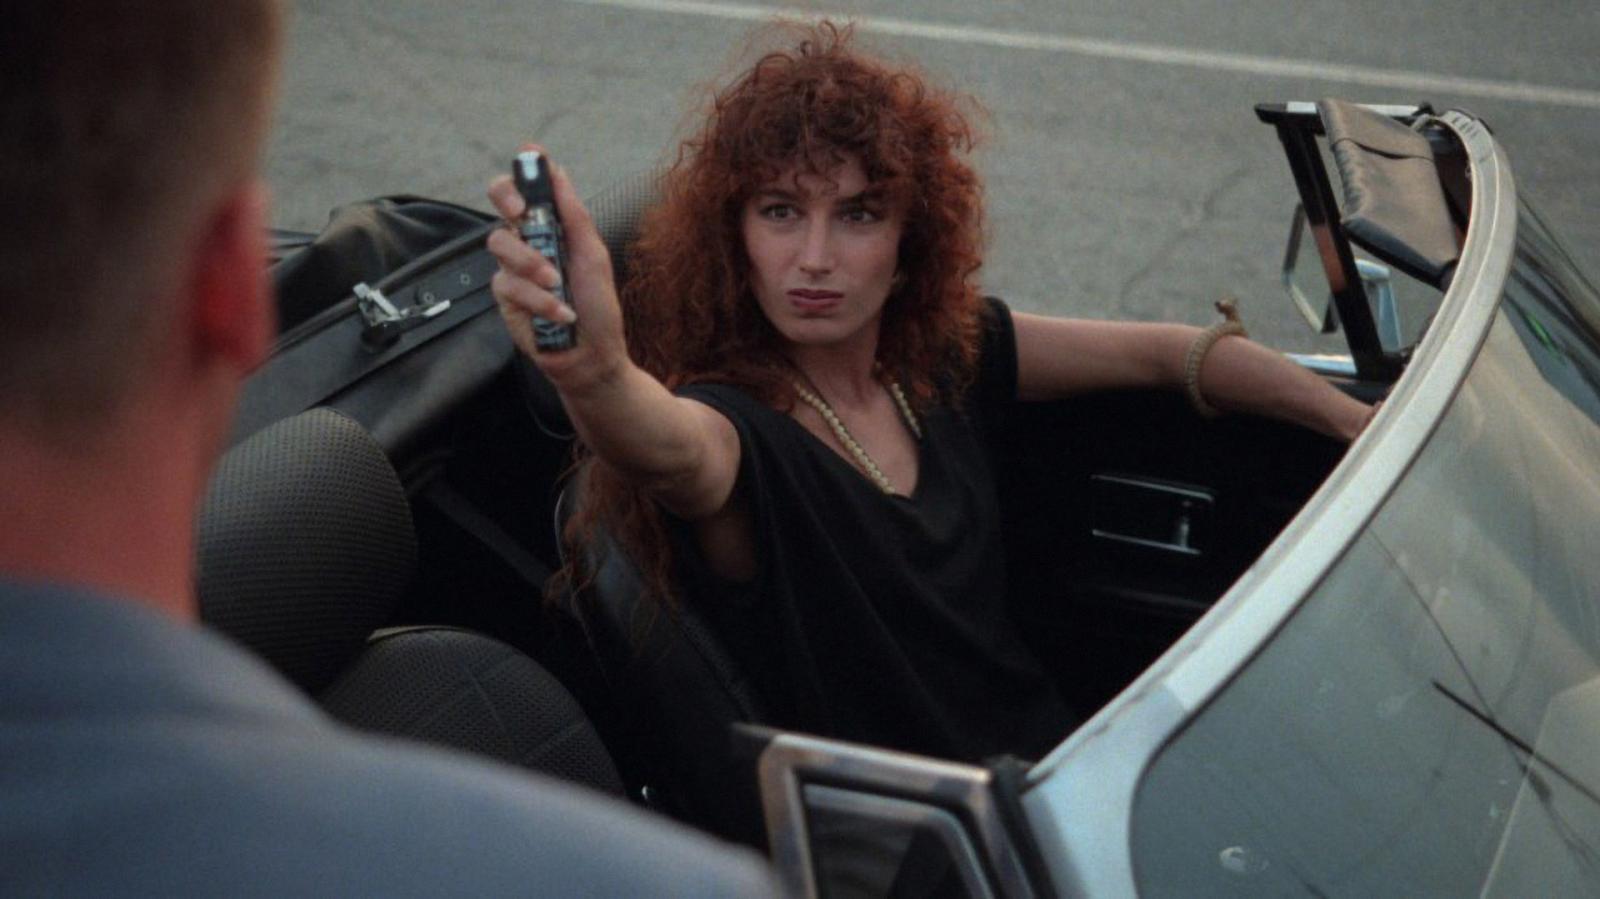 Straight from the Past: Top 5 Movies That Best Capture the '80s Vibe - image 3